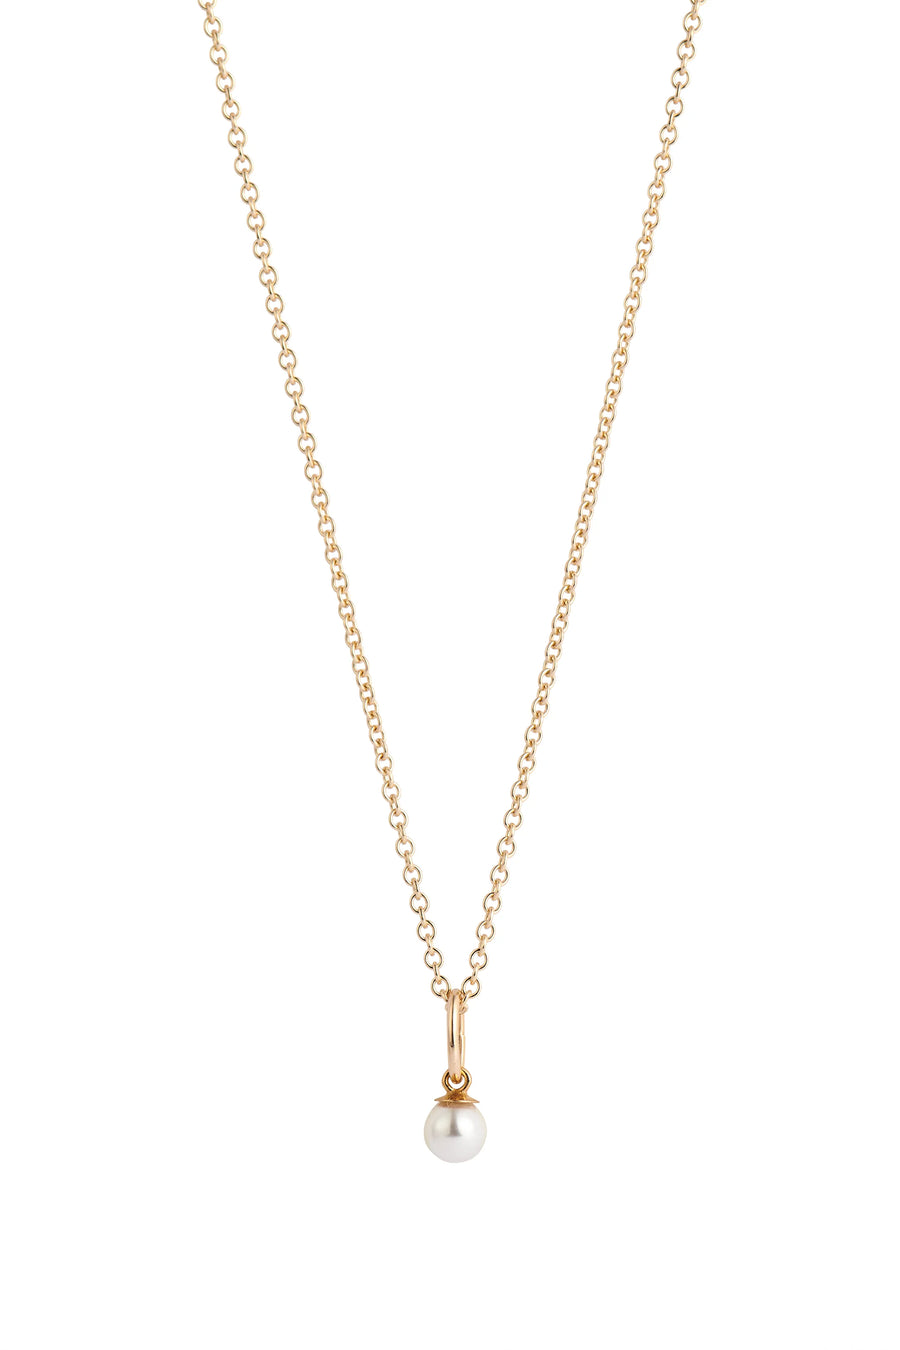 LISBETH JEWELRY - LIV NECKLACE - FILLED GOLD